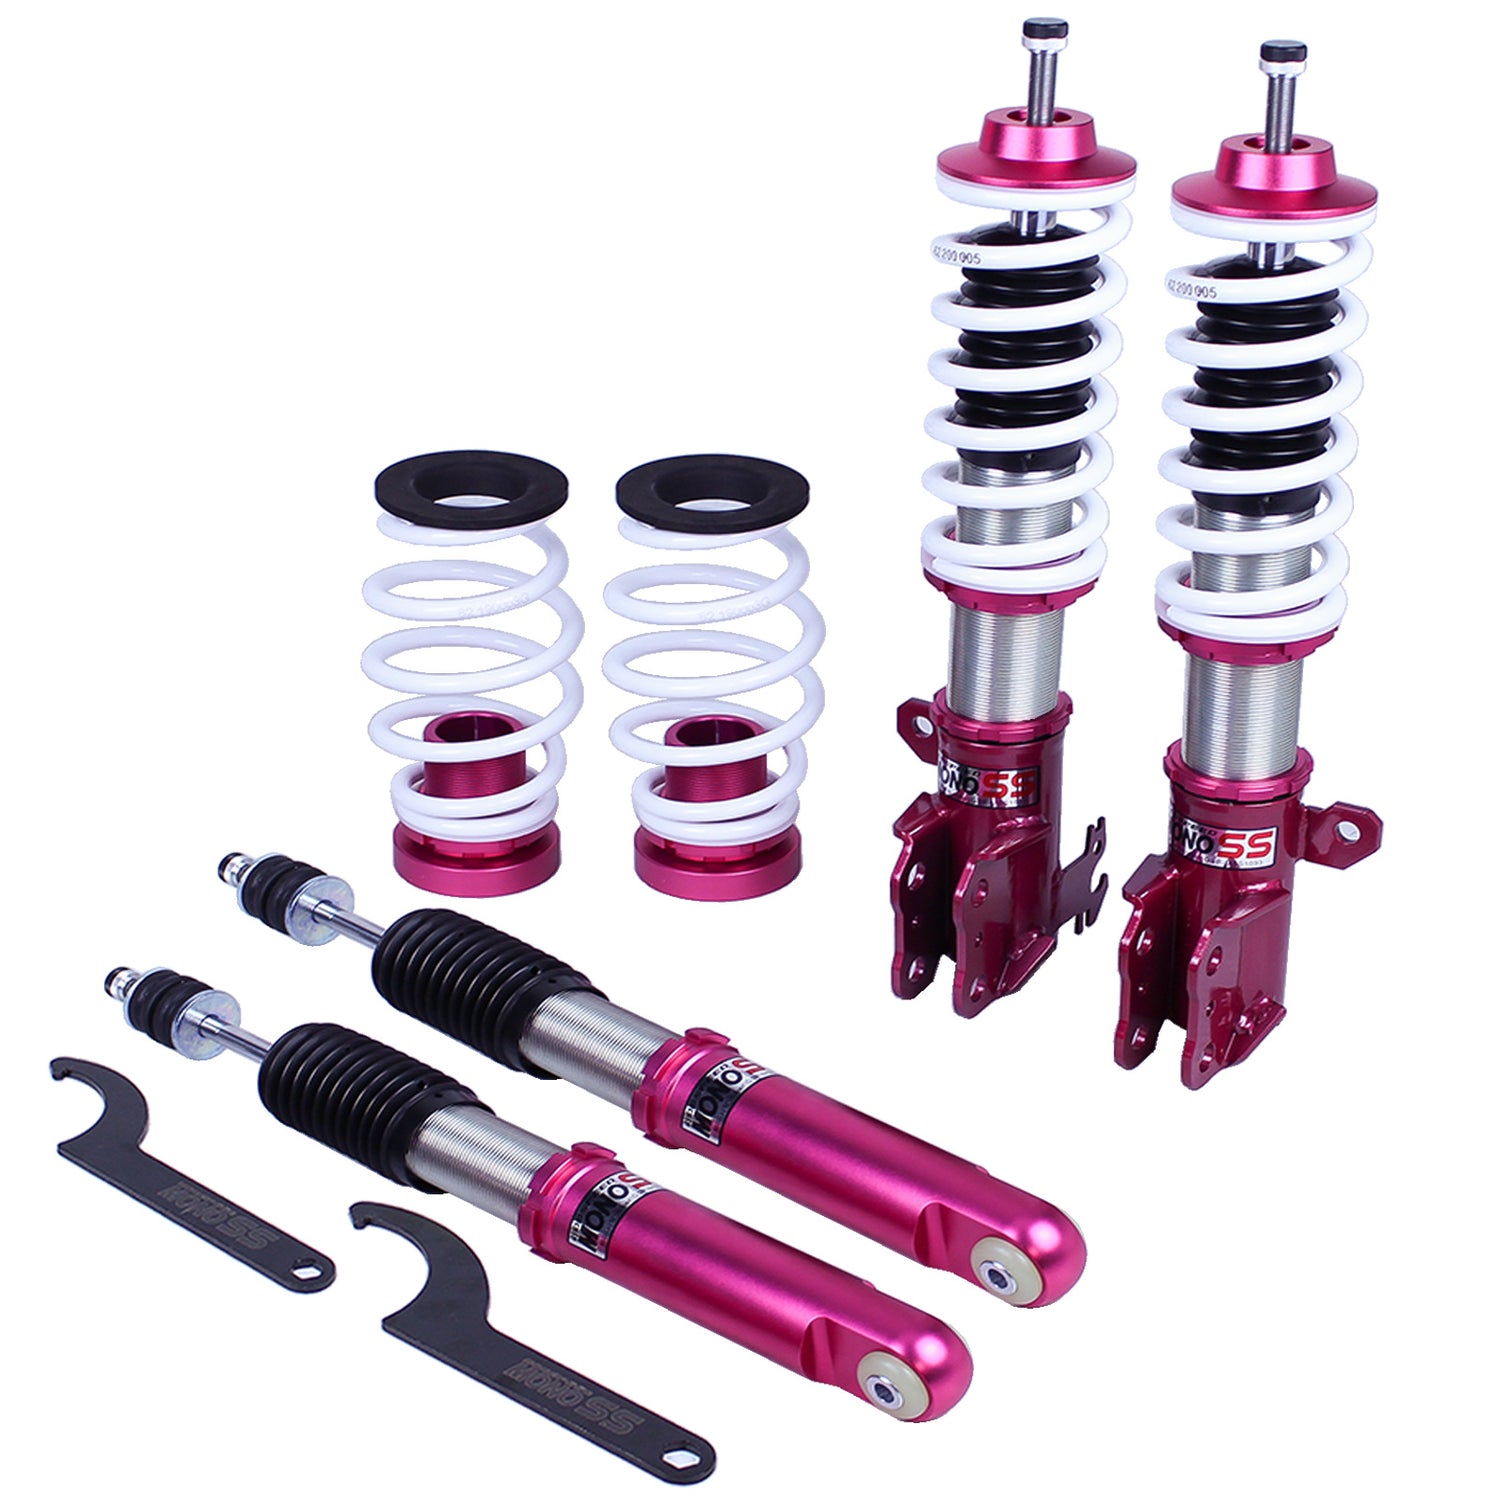 Godspeed MSS1093-A MonoSS Coilover Lowering Kit, Fully Adjustable, Ride Height, Spring Tension And 16 Click Damping, Toyota Yaris(XP90) 2006-11